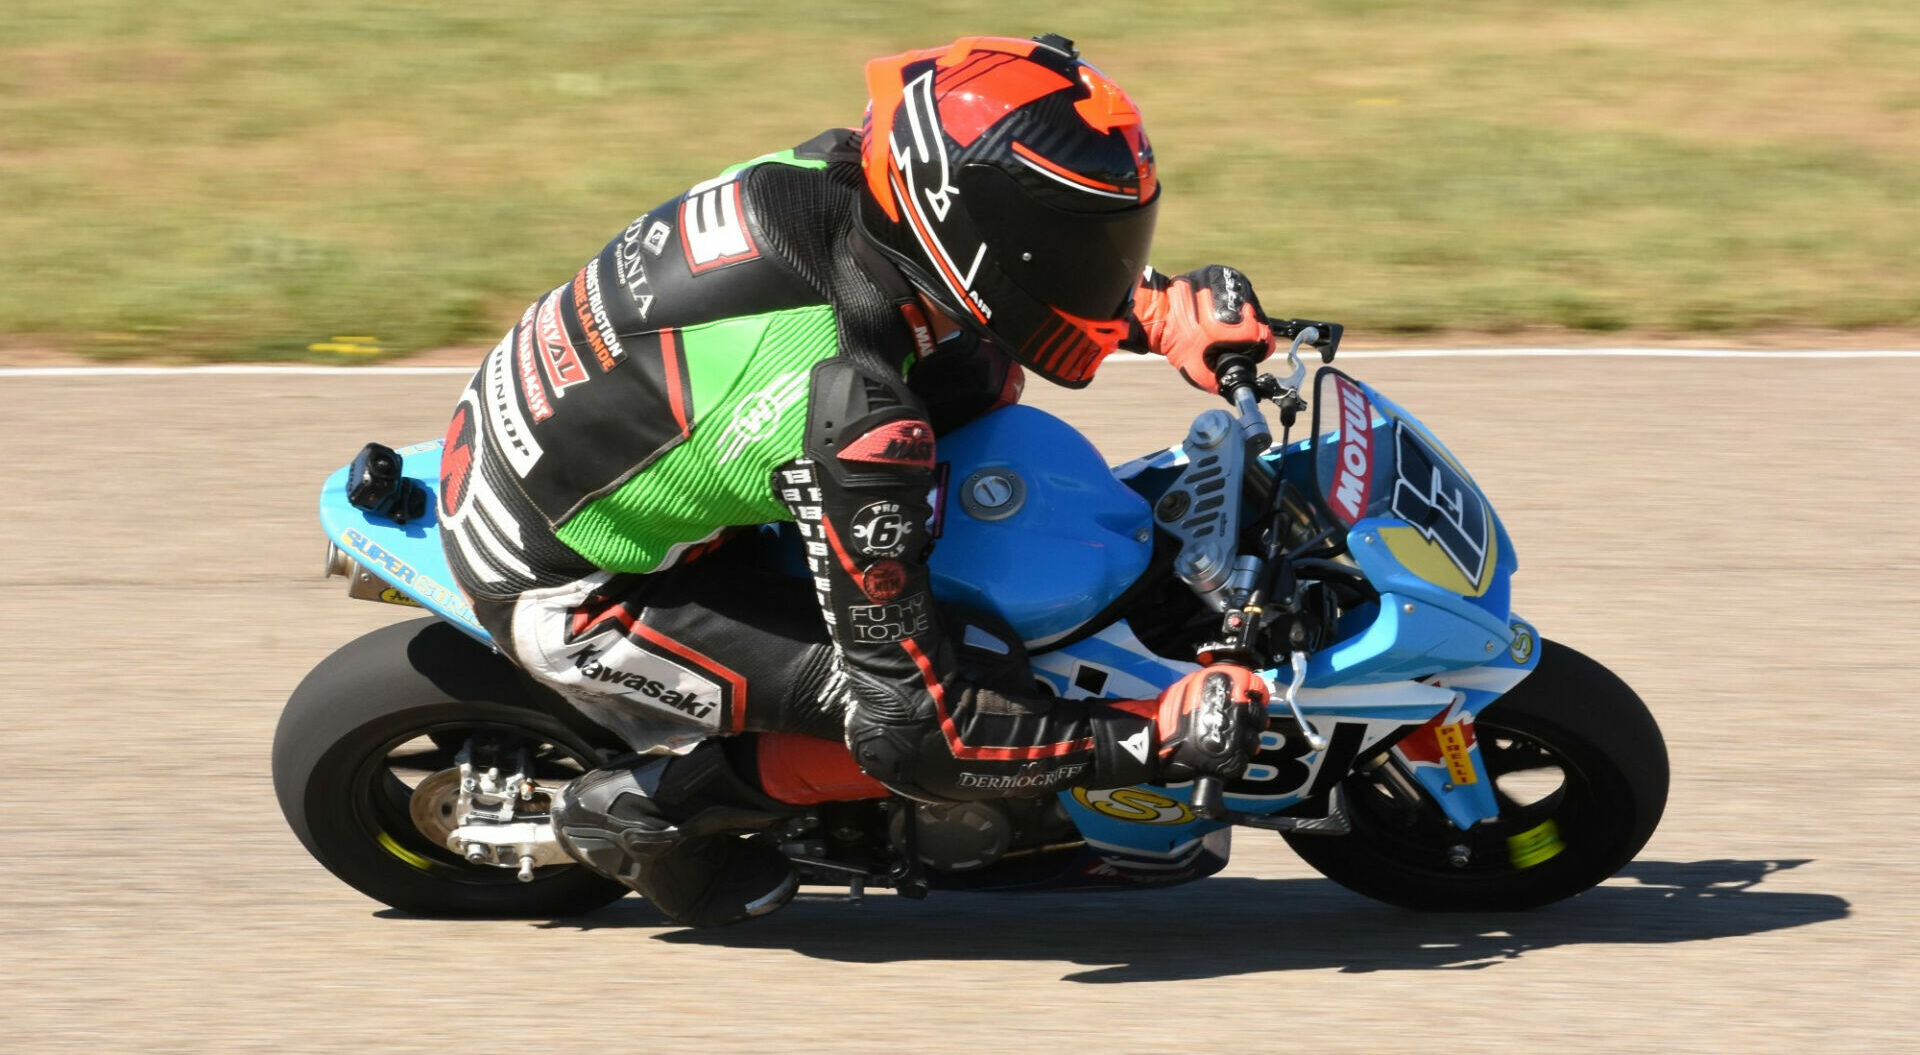 Vincent Lalande (13) captured the inaugural Motul Canada Cup national championship on Saturday, winning his ninth race of the campaign at Lombardy. Photo by Colin Fraser, courtesy CSBK/PMP.